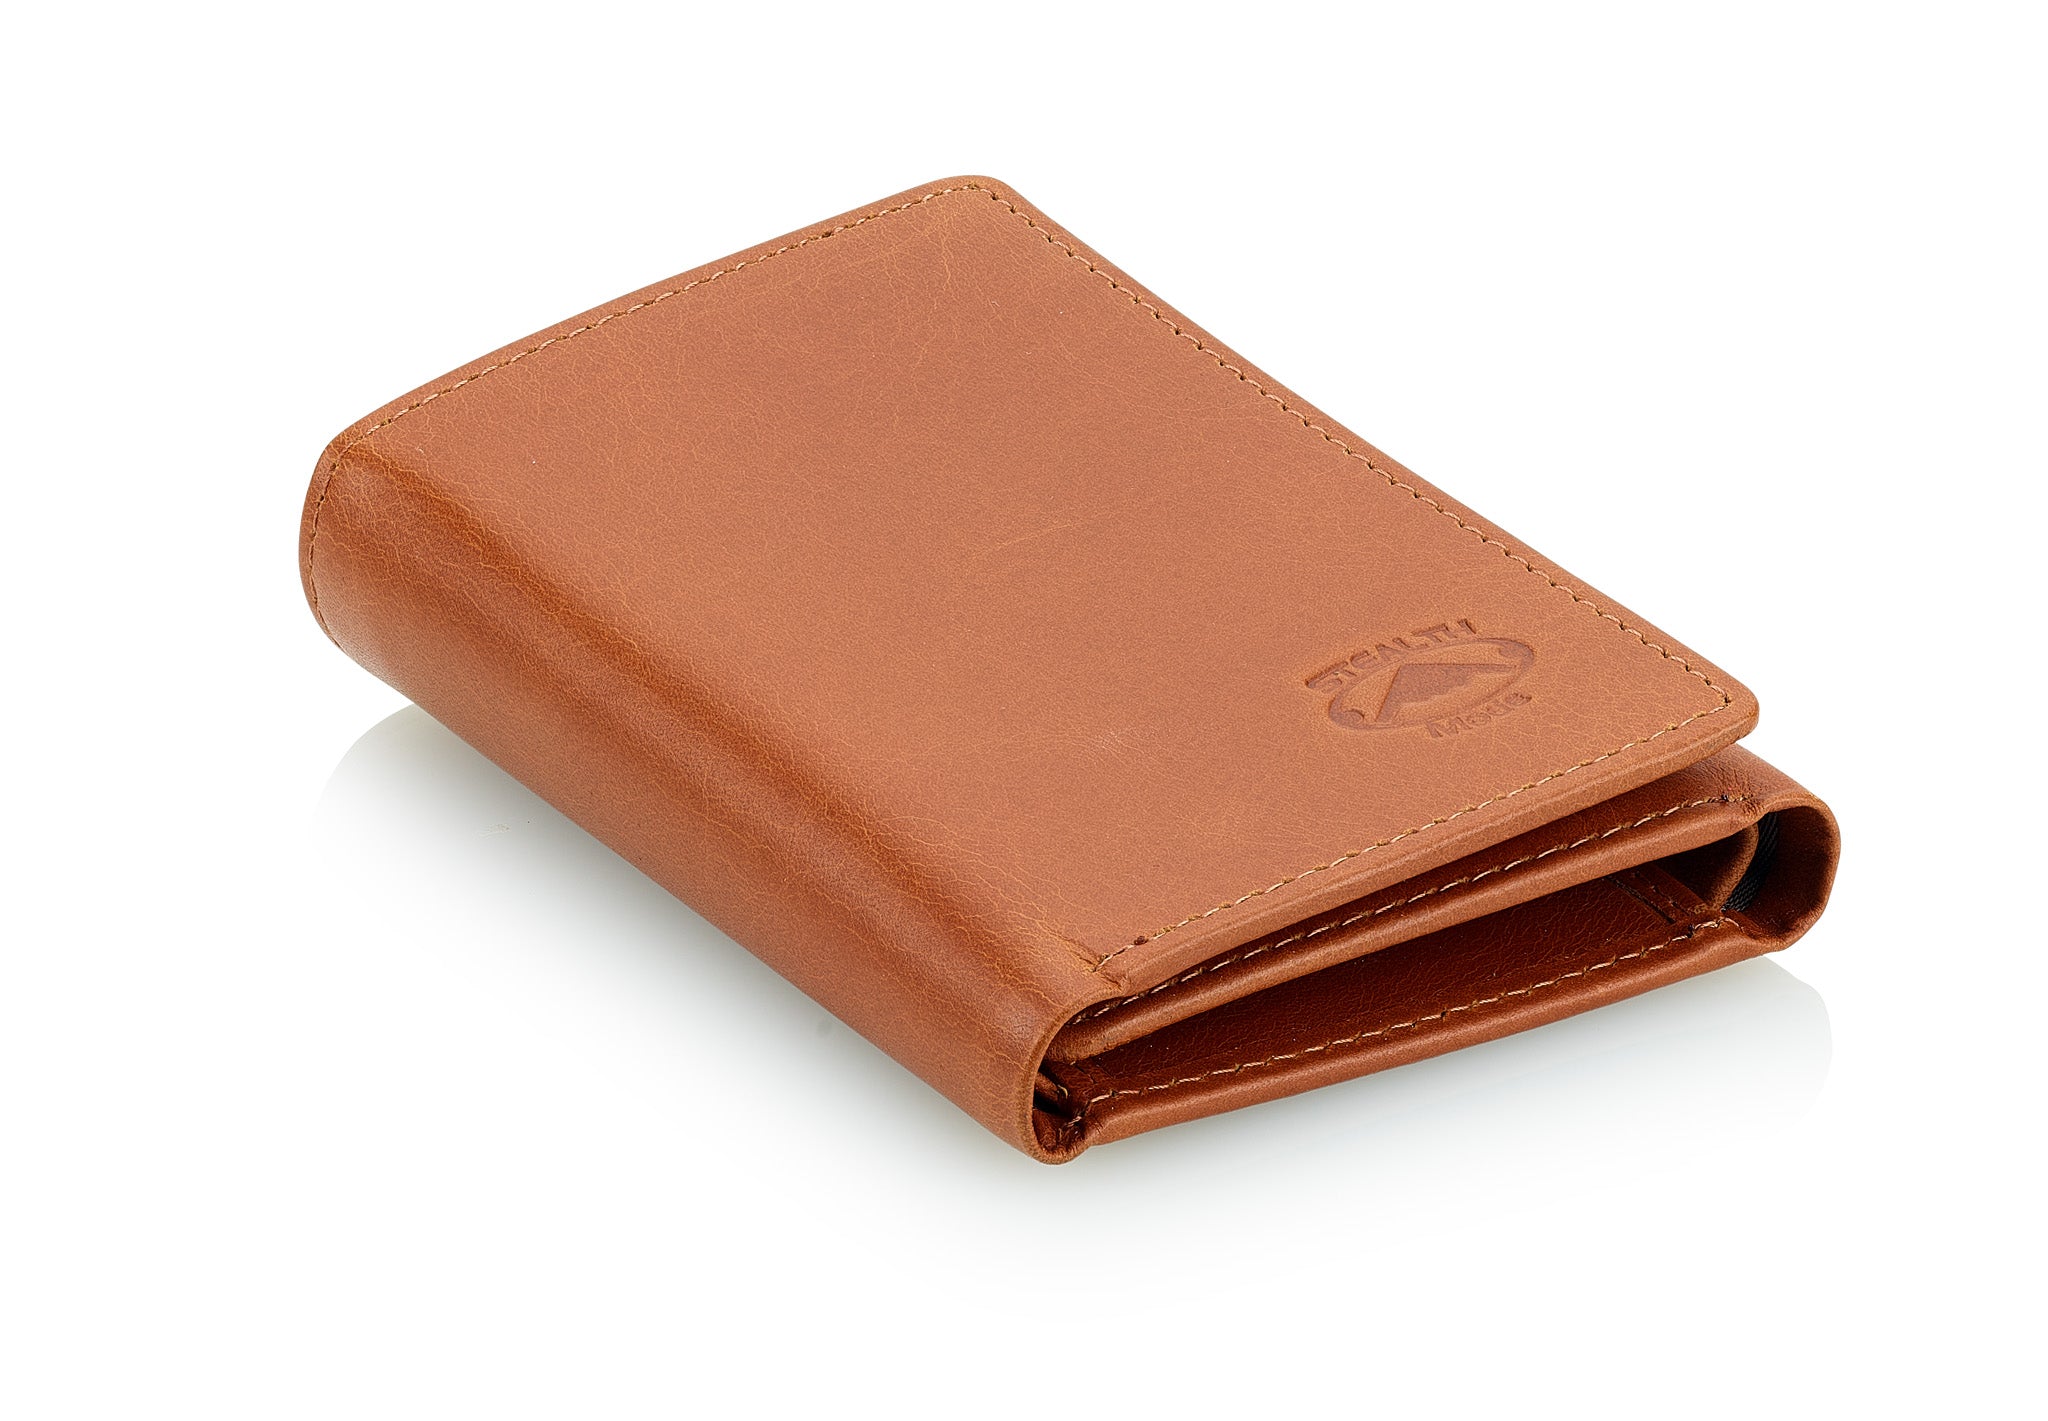 Trifold Leather Wallet for Men with ID Holder and RFID Blocking (Light Brown)